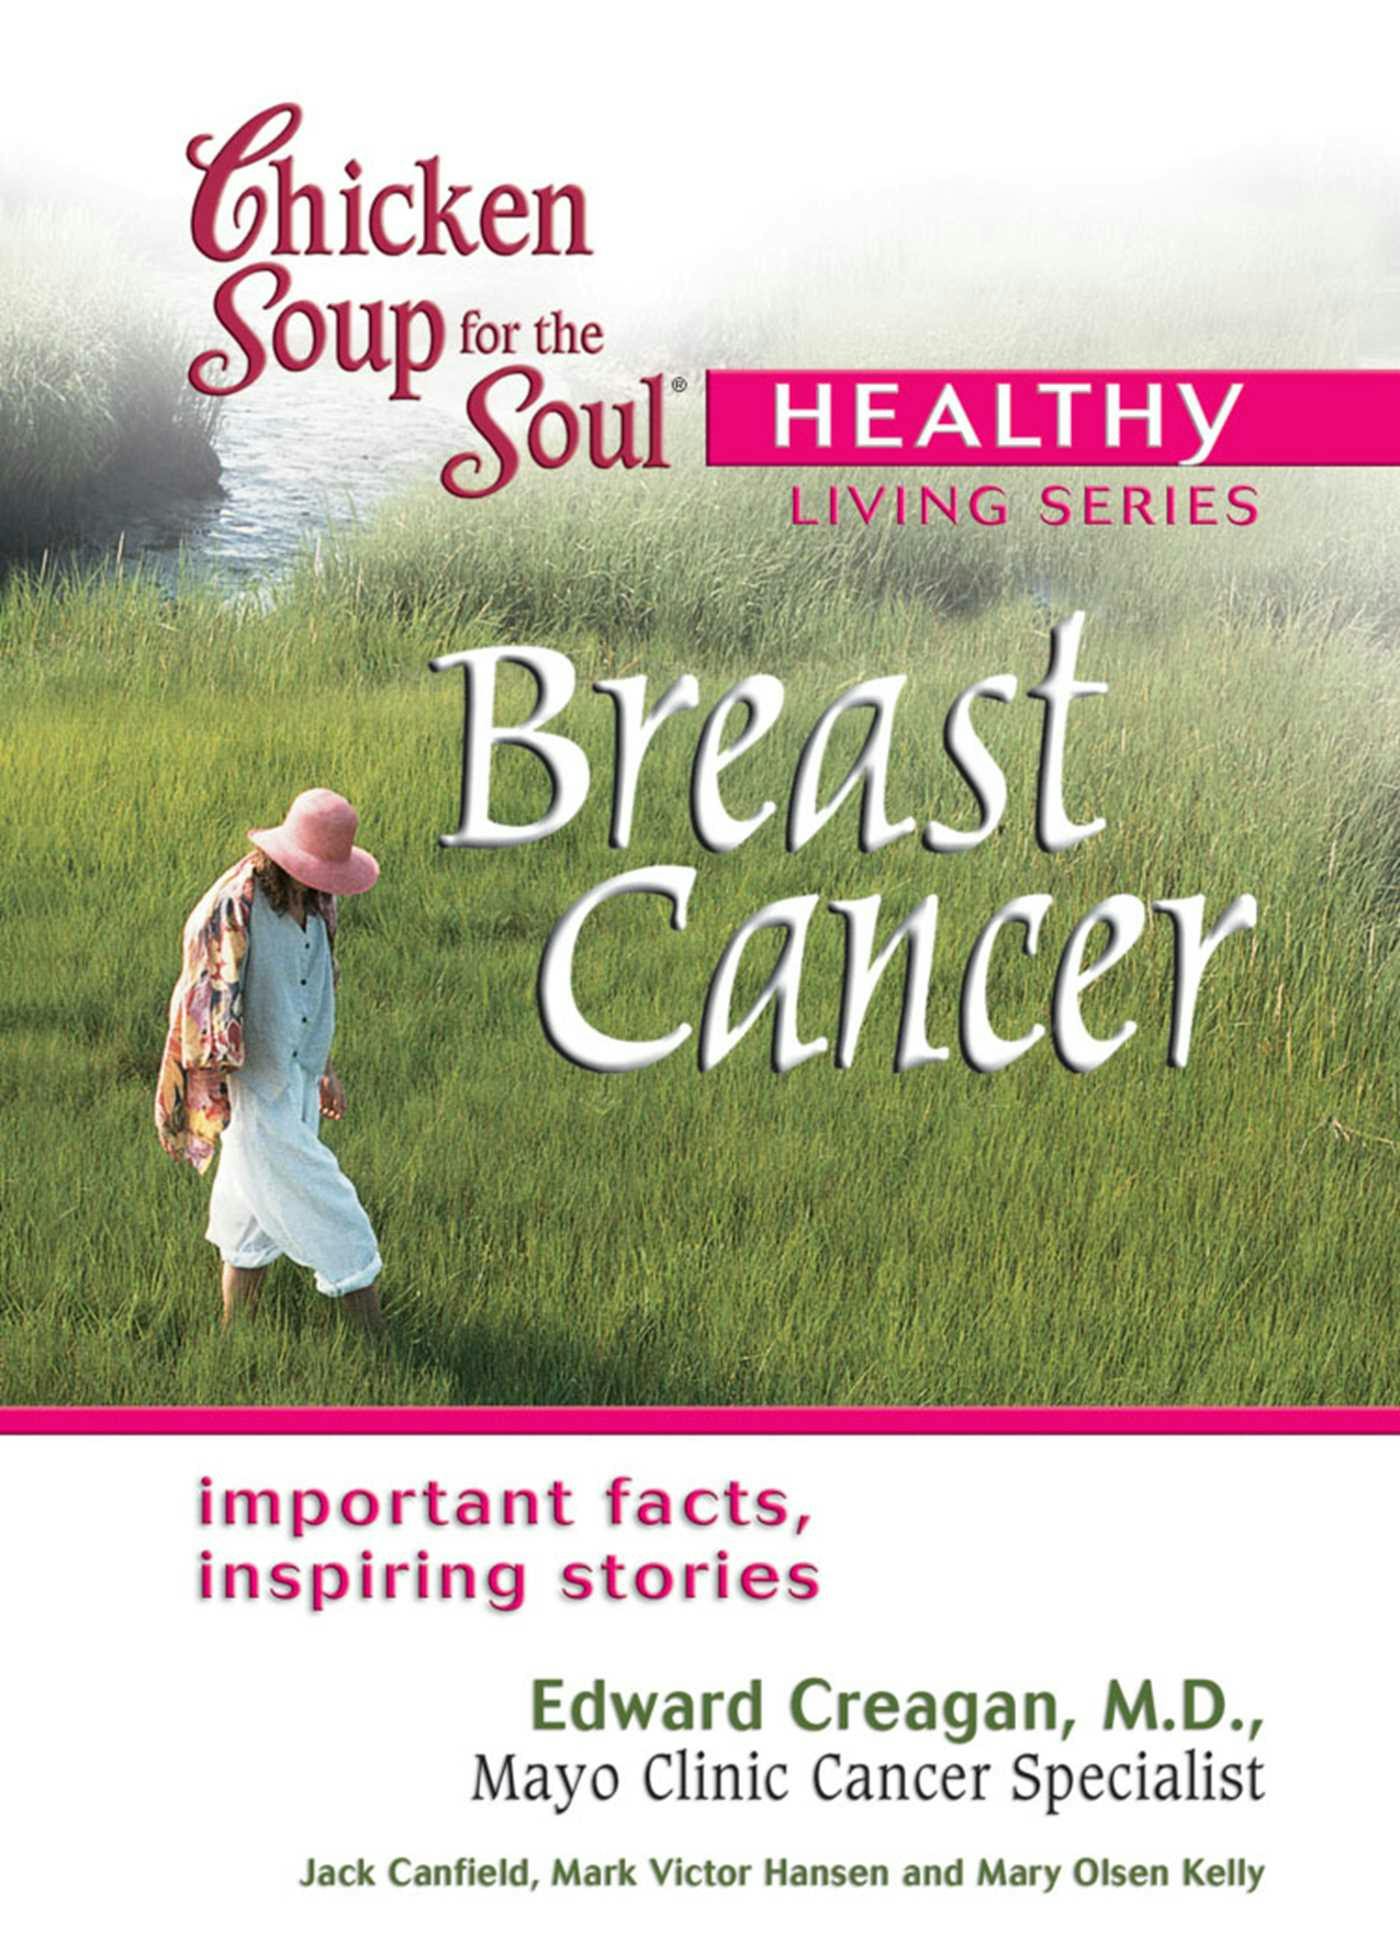 Chicken Soup for the Soul Healthy Living Series: Breast Cancer: Important Facts, Inspiring Stories - undefined